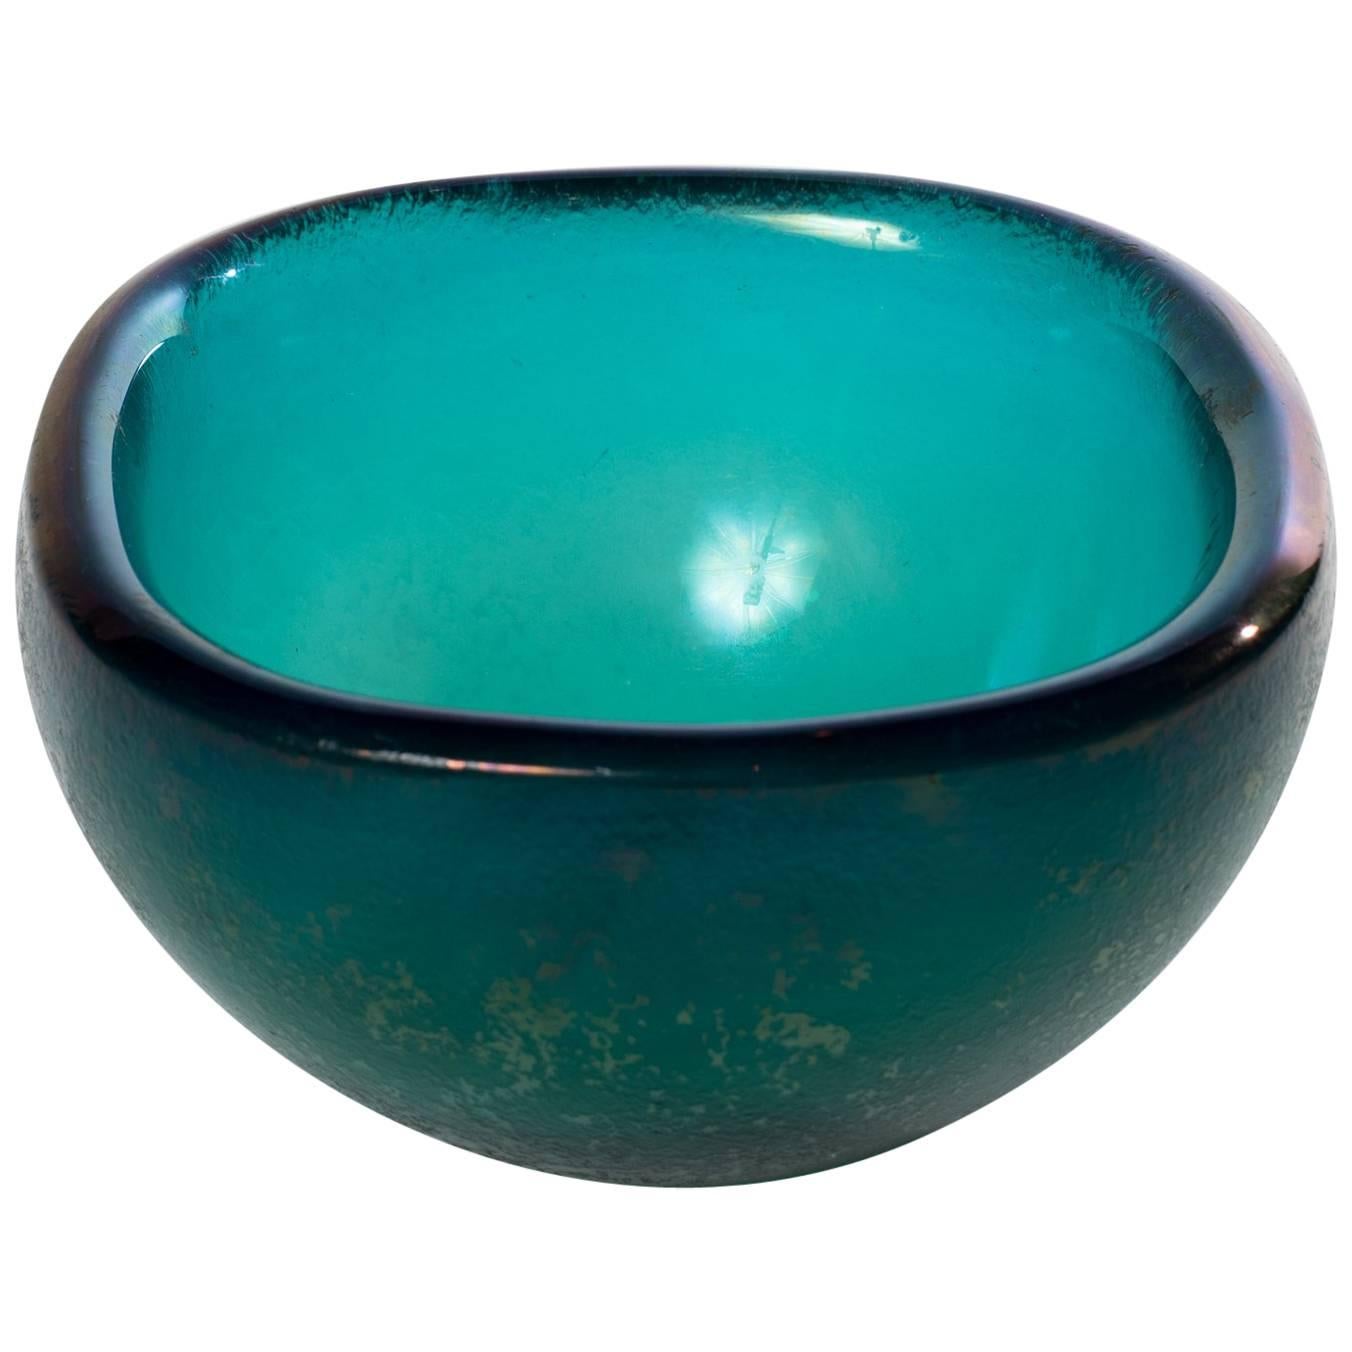 Turquoise Glass Bowl "Corroso" in the Attributed Carlo Scarpa